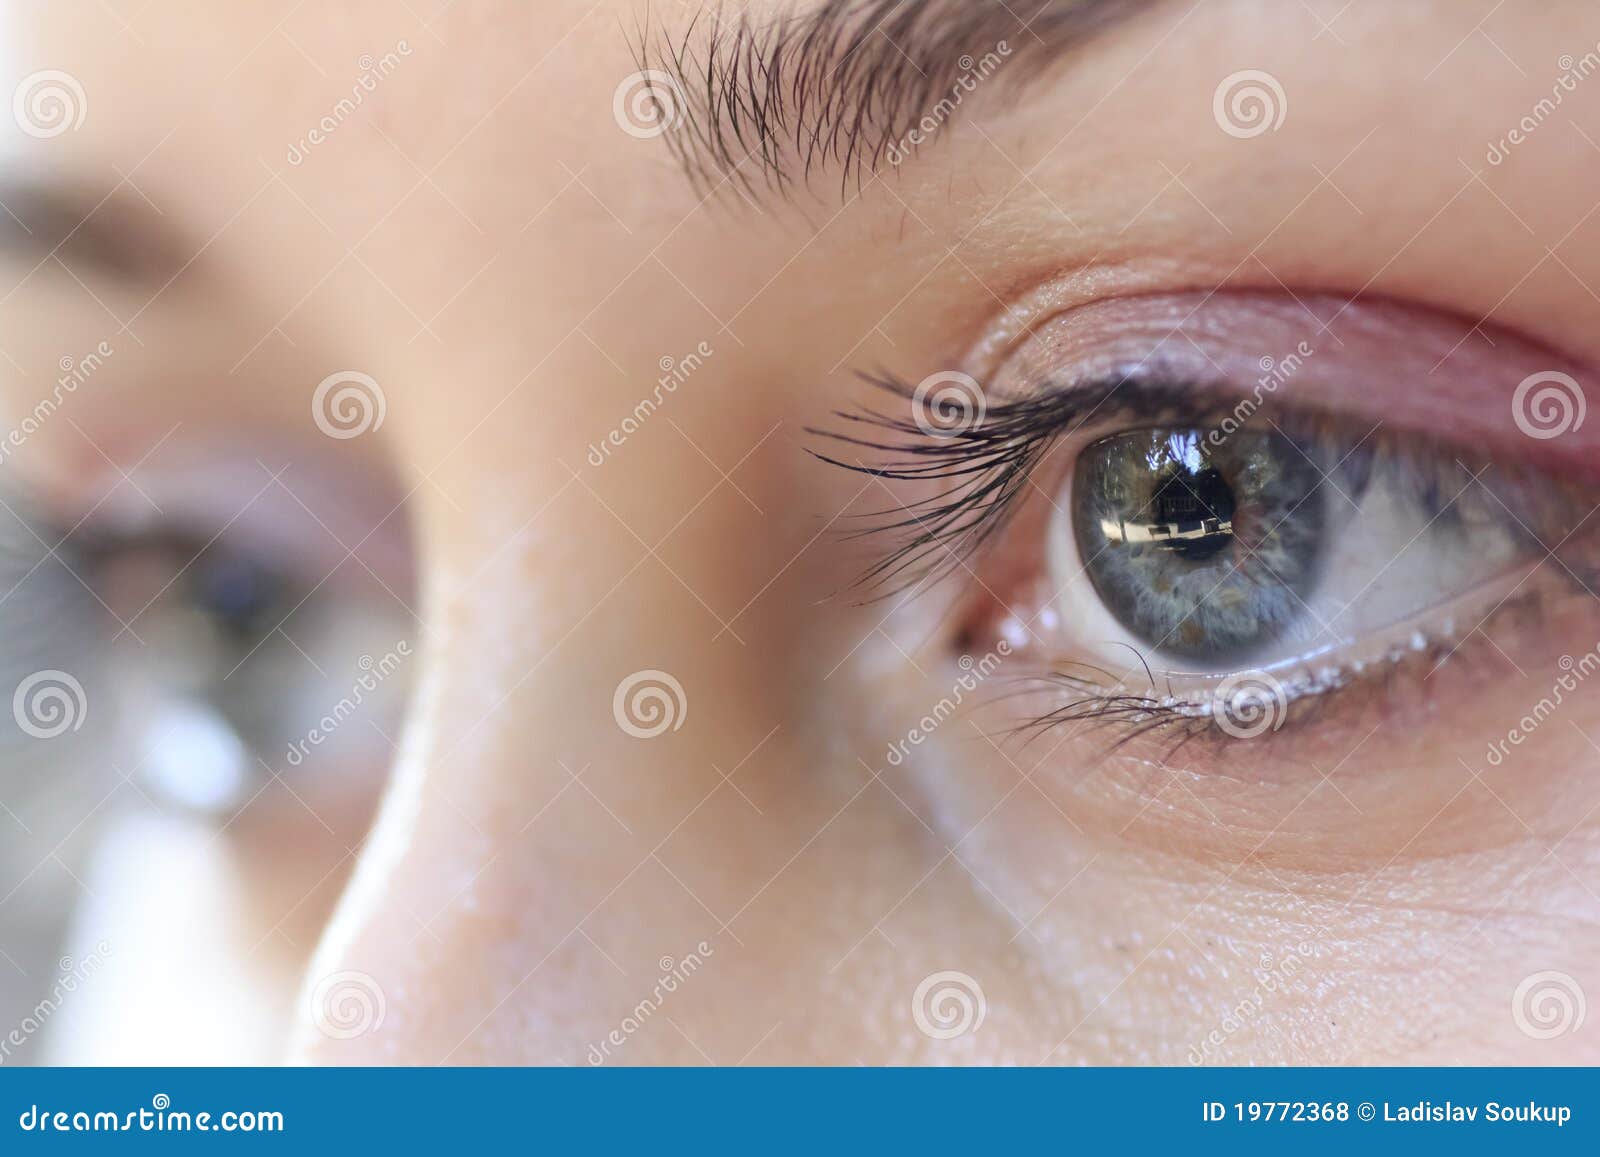 eyes of young woman